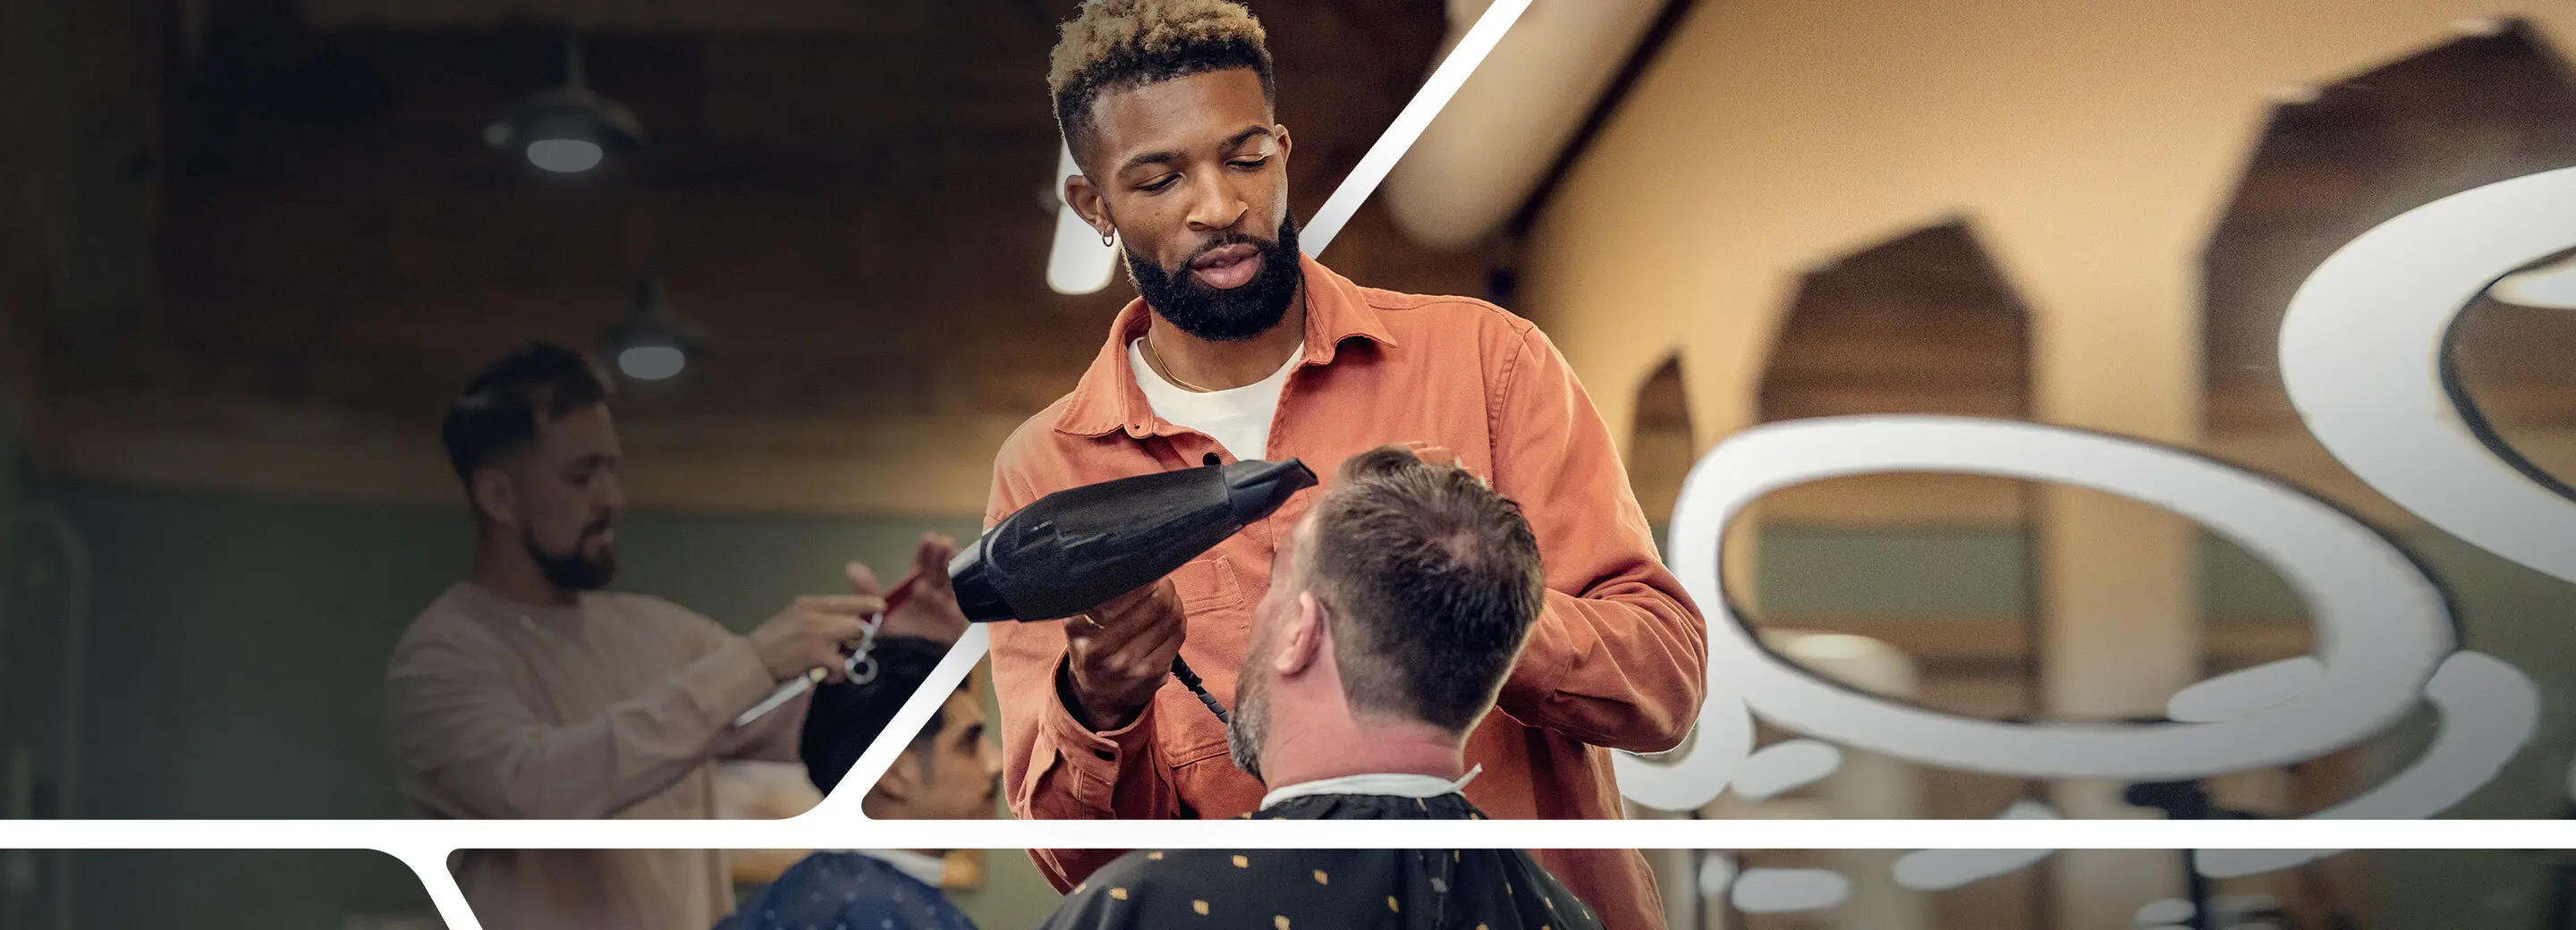 Barber blow drying a customer's hair. 